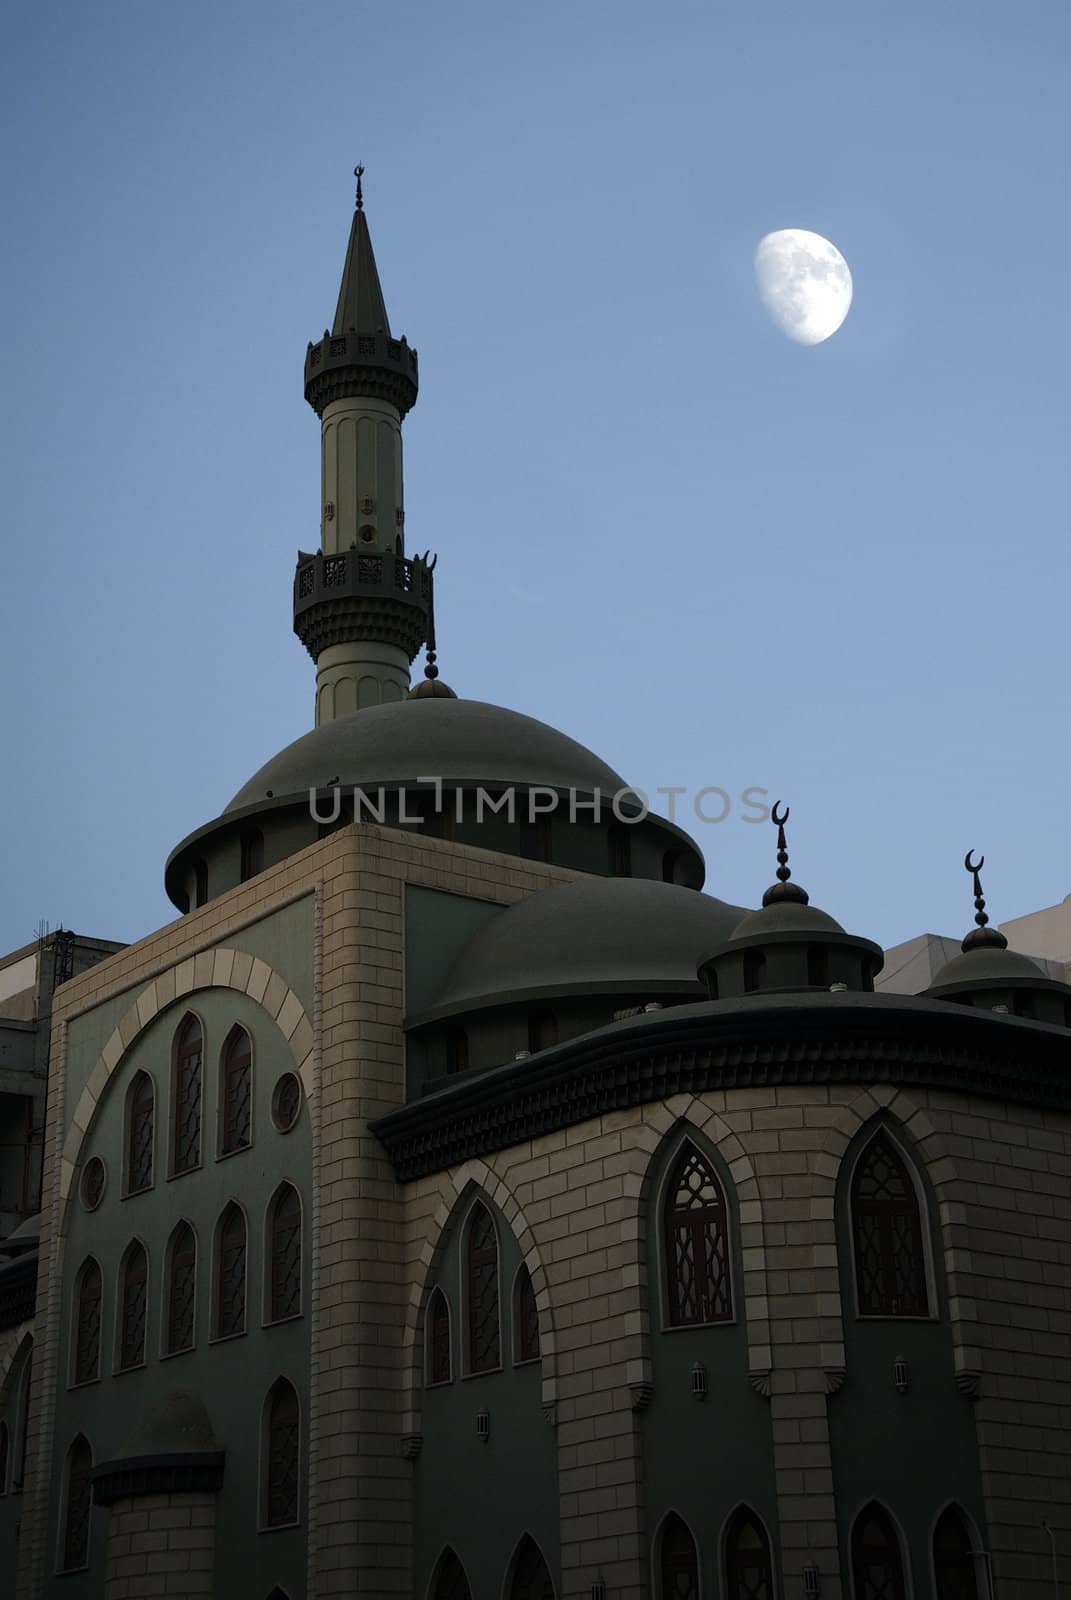 A Middle Eastern Mosque stands silently in the moonlight